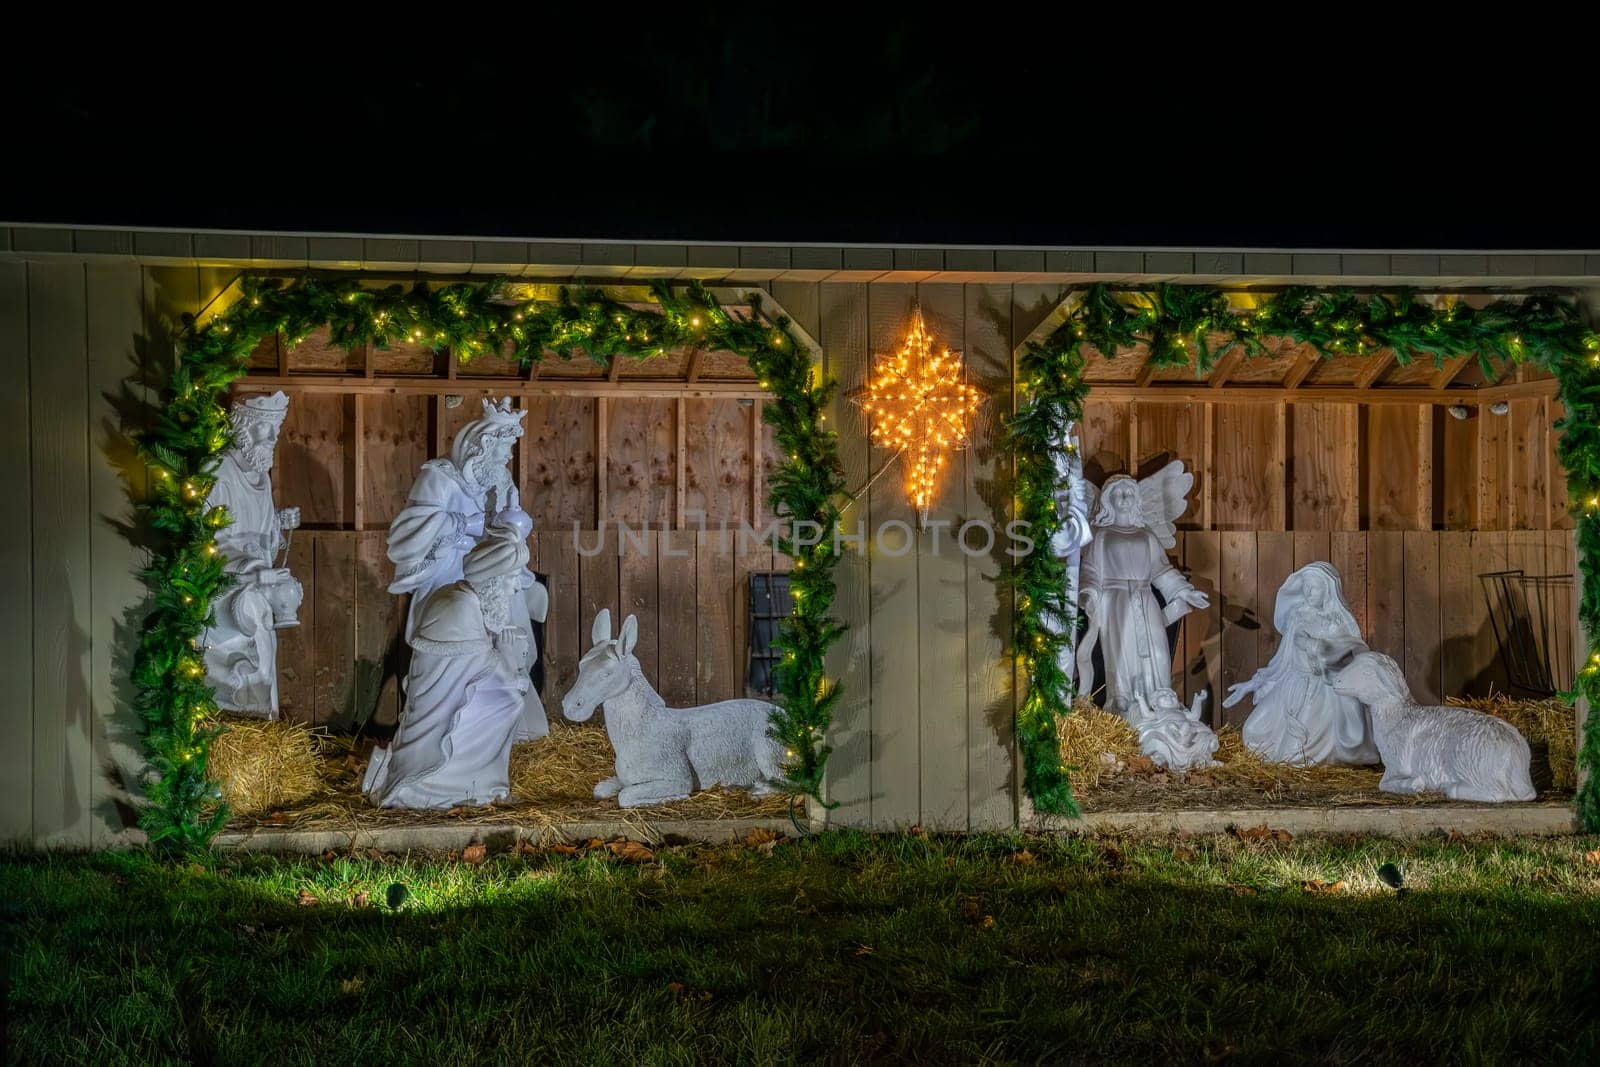 Nighttime Image Of A White Nativity Scene With Figures Of Mary, Joseph, And Wise Men Flanked By Animals, Illuminated By A Star And Garland Lights.